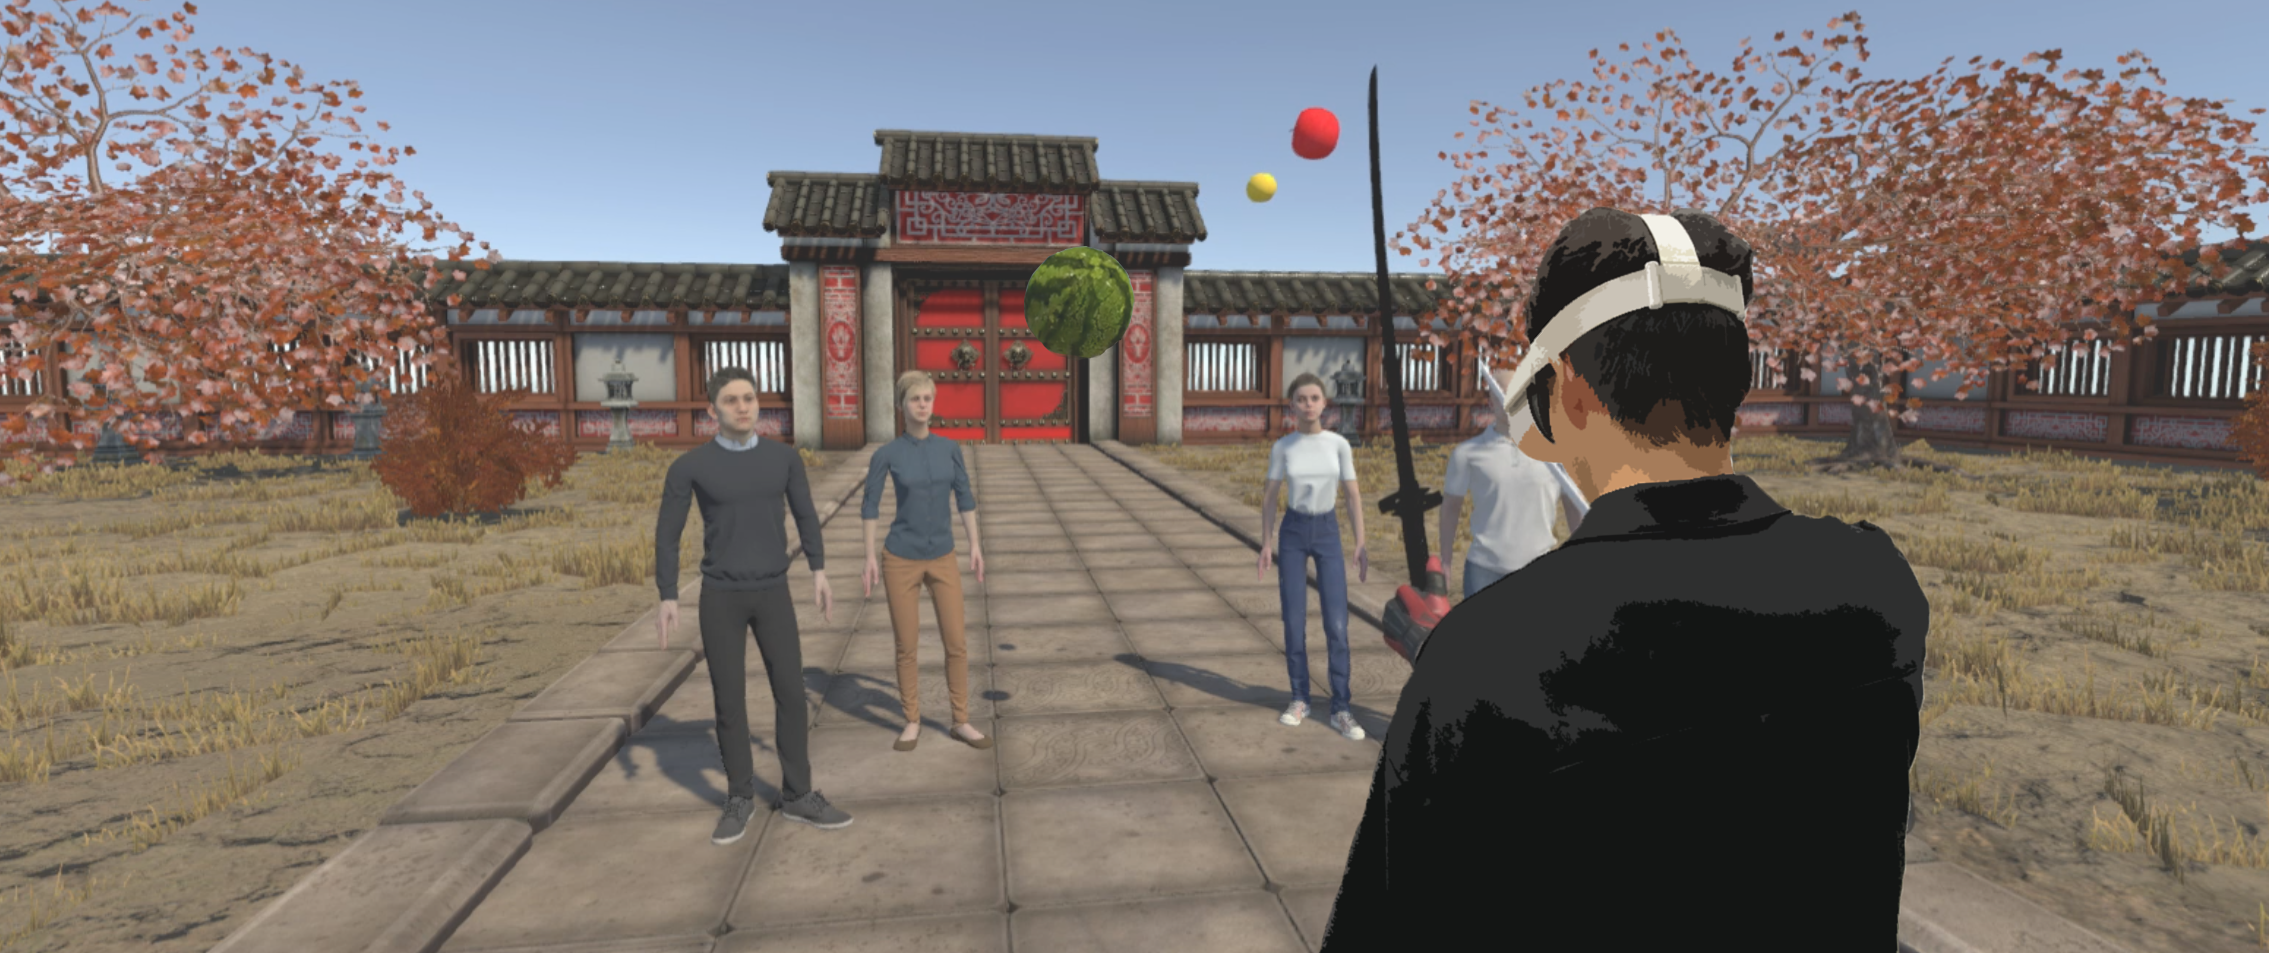 Image of the game environment displayed in a third person perspective with 4 friends model stnading in front of the player.